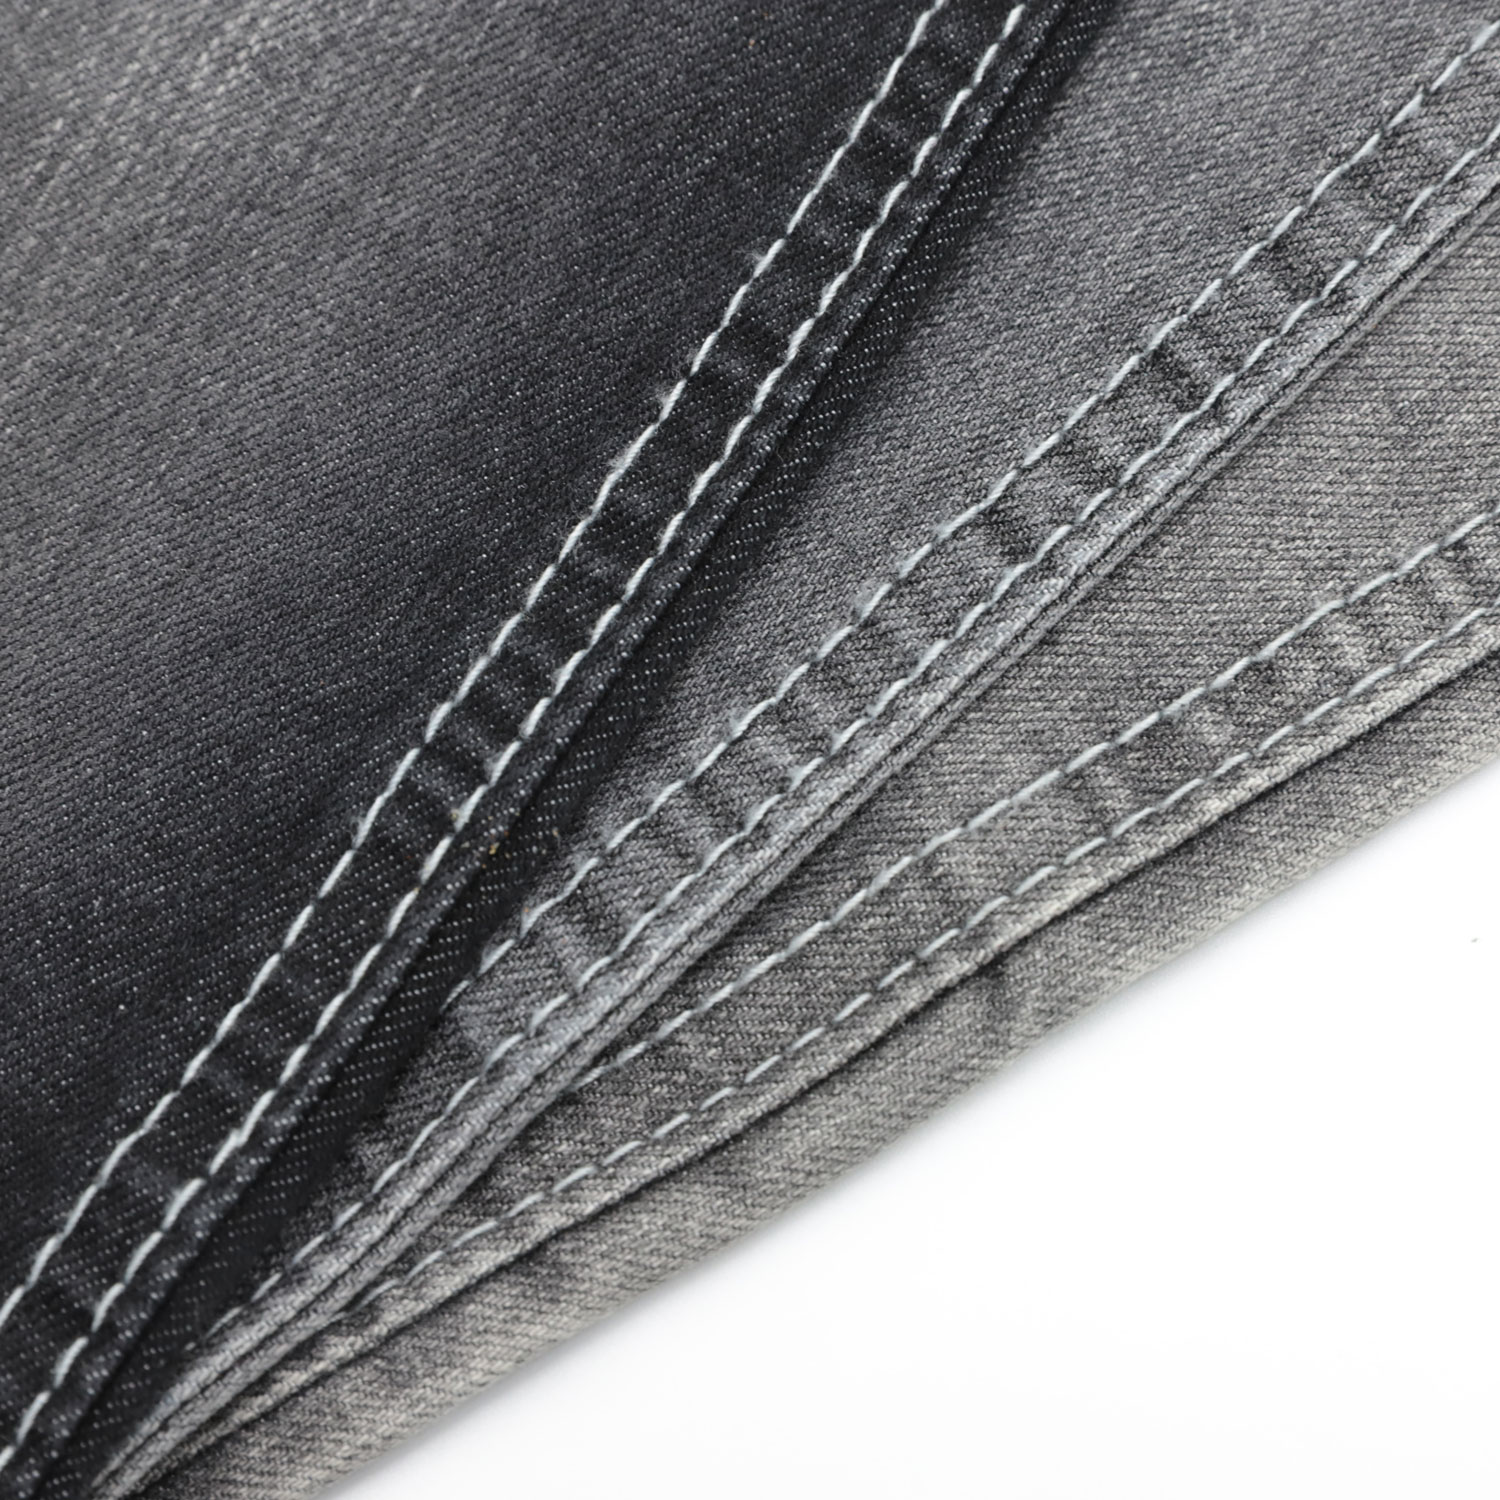 Stretch Denim Fabric for Bigger, Stronger and Better-Looking Jeans 1